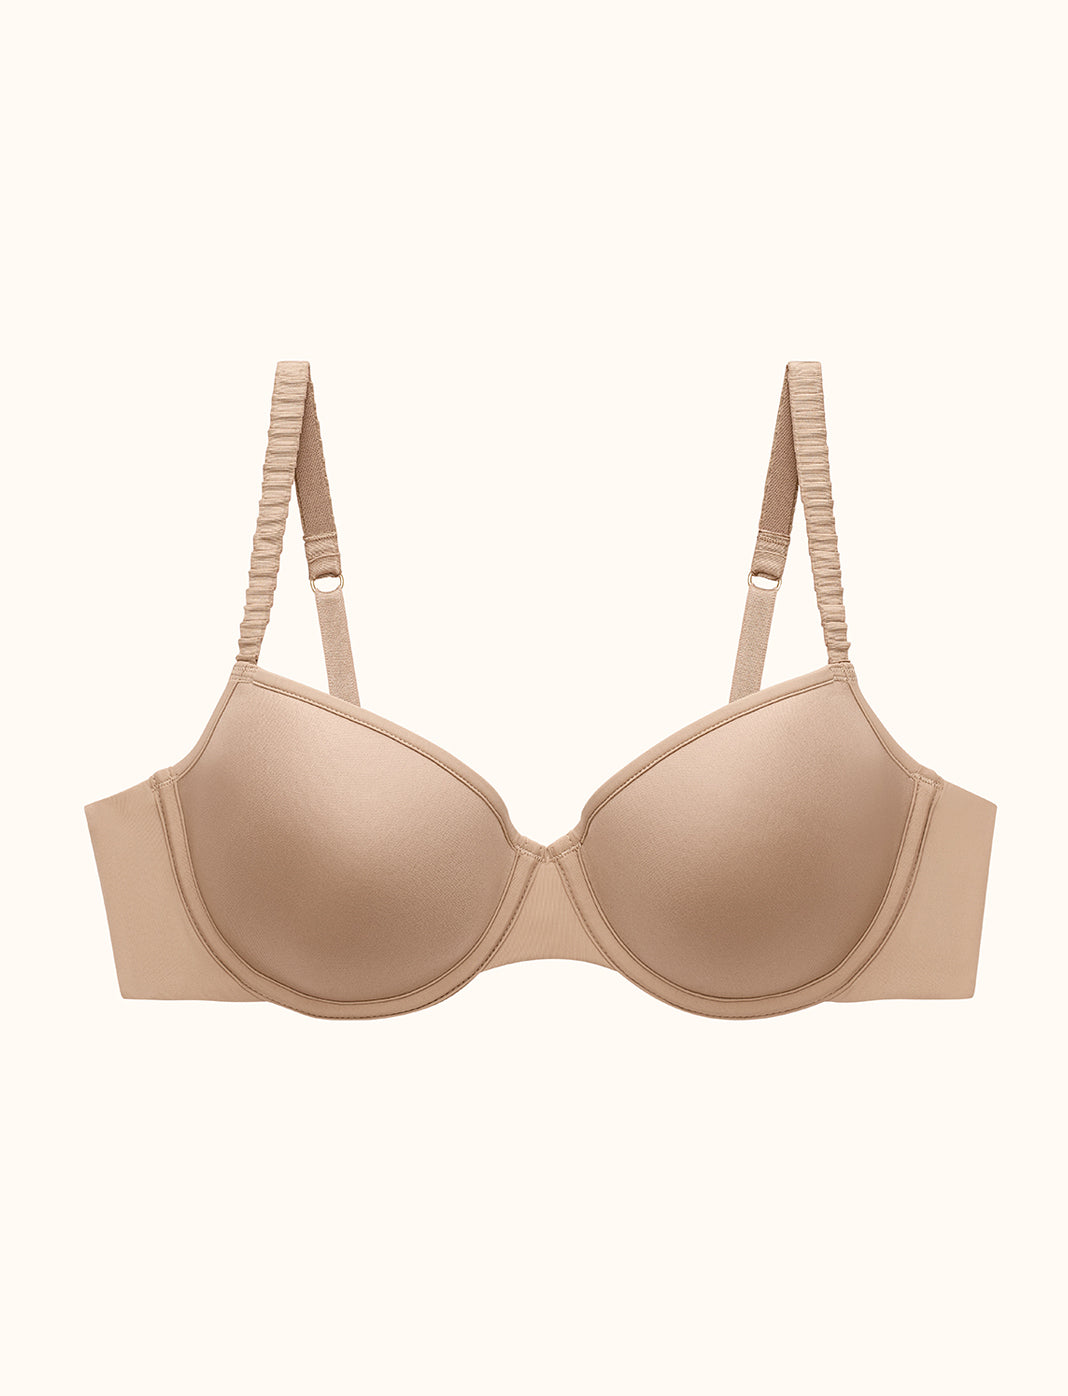 This is the next bra you should buy, based on your zodiac sign